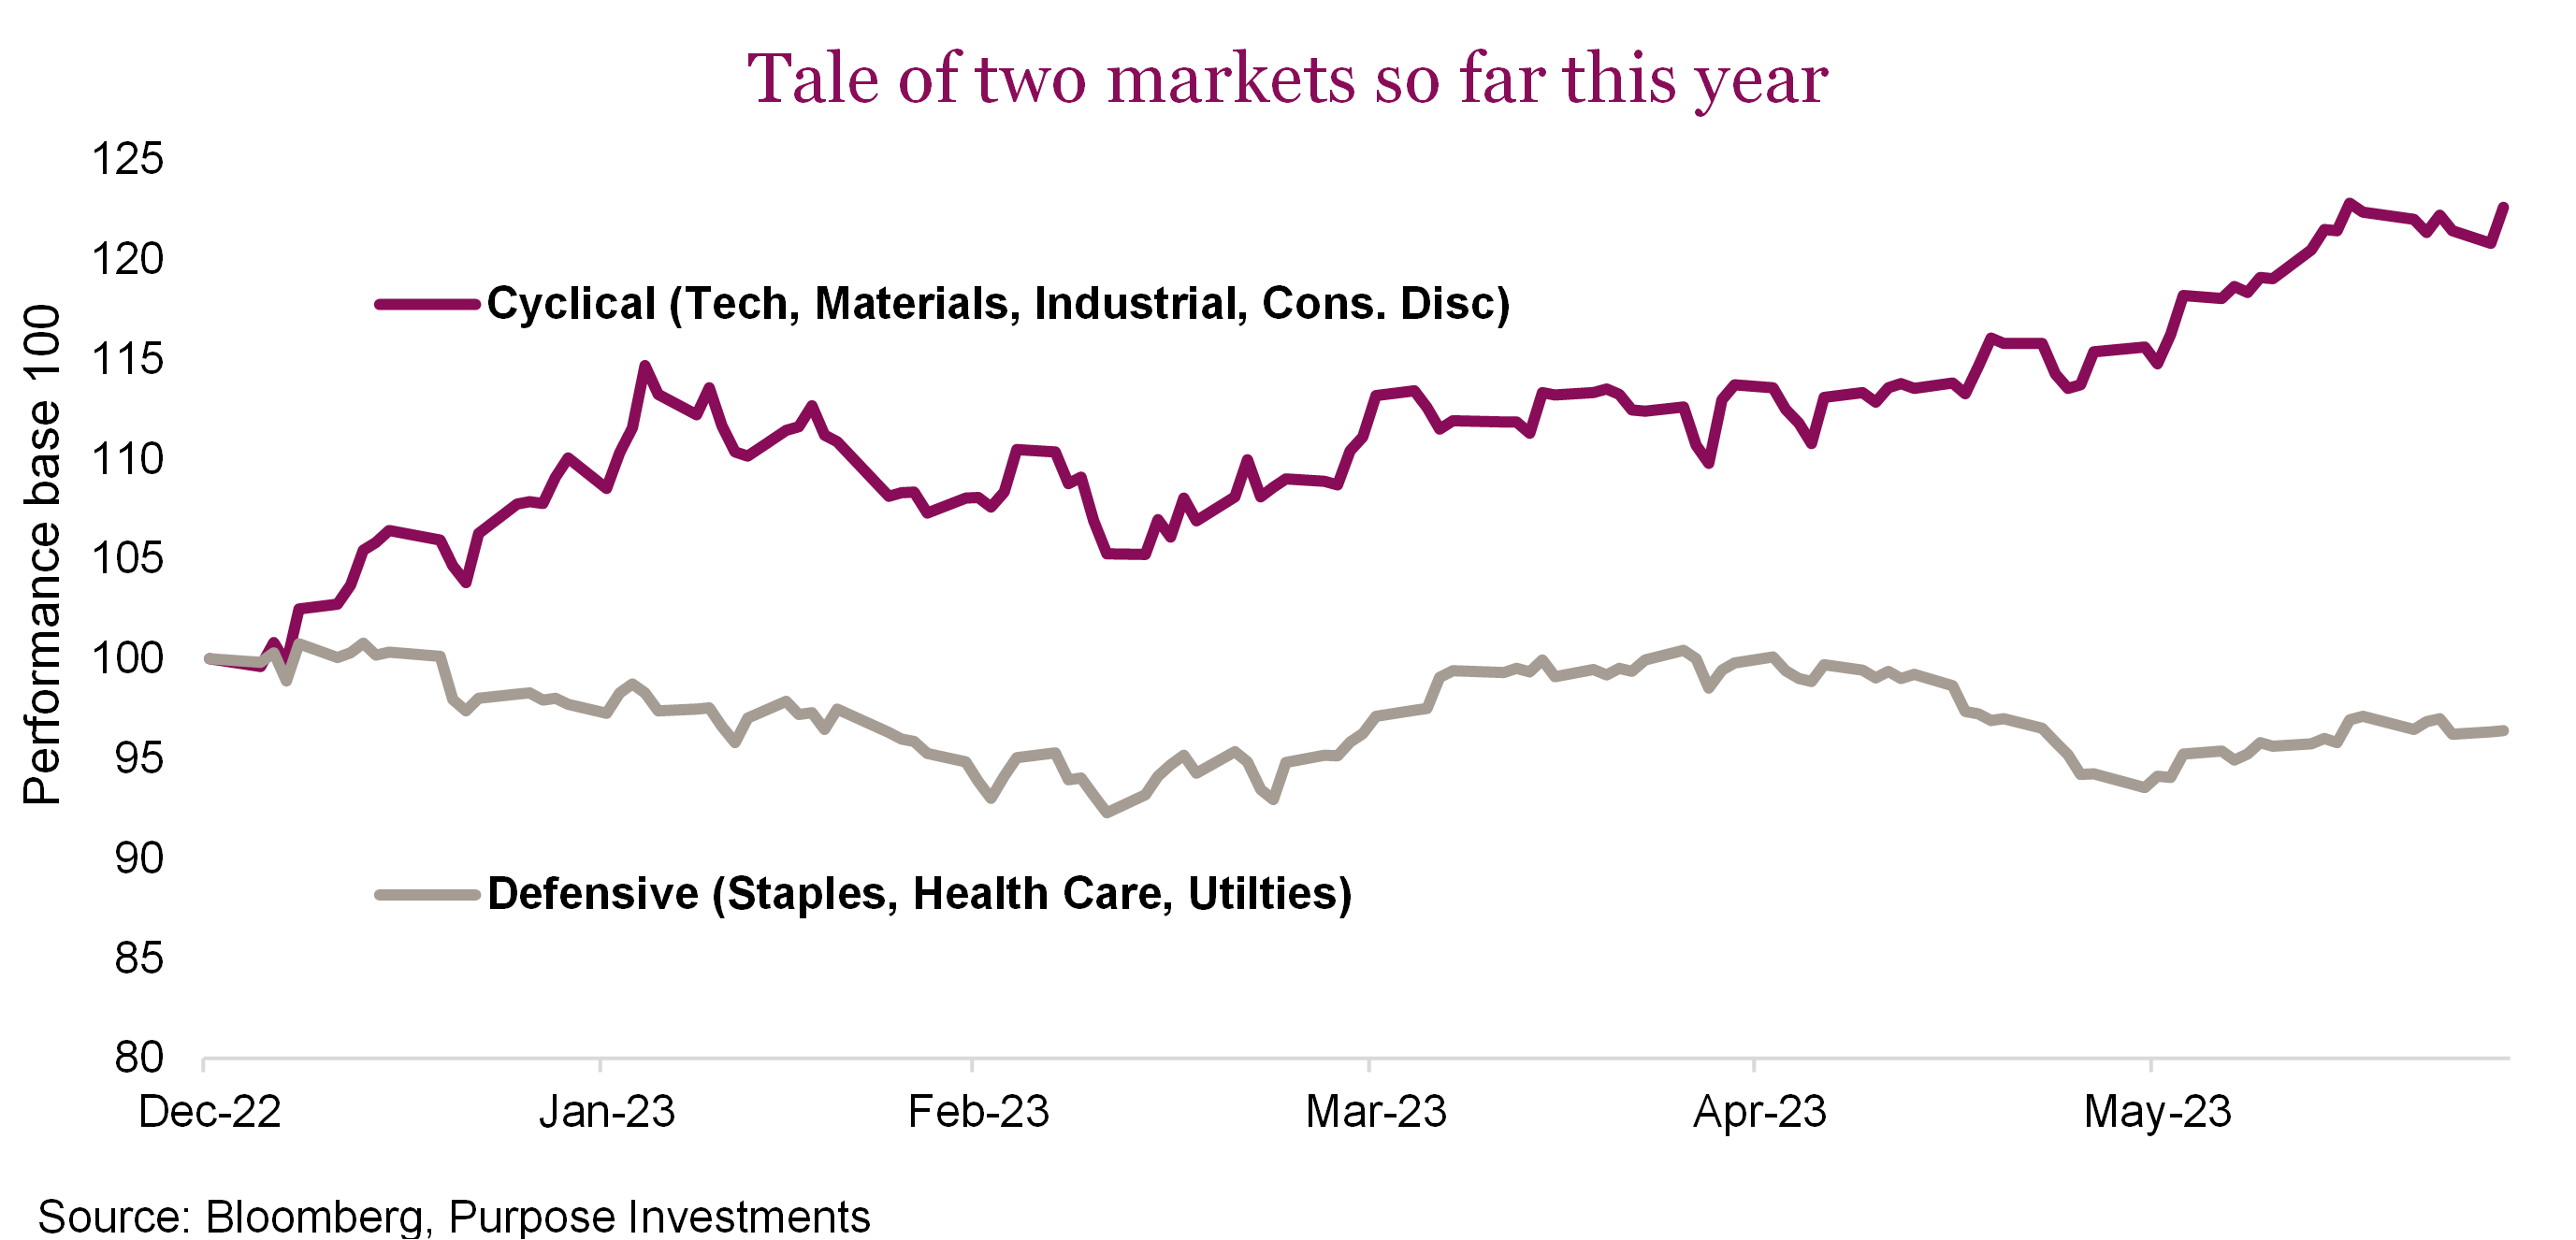 Tale of two markets so far this year
